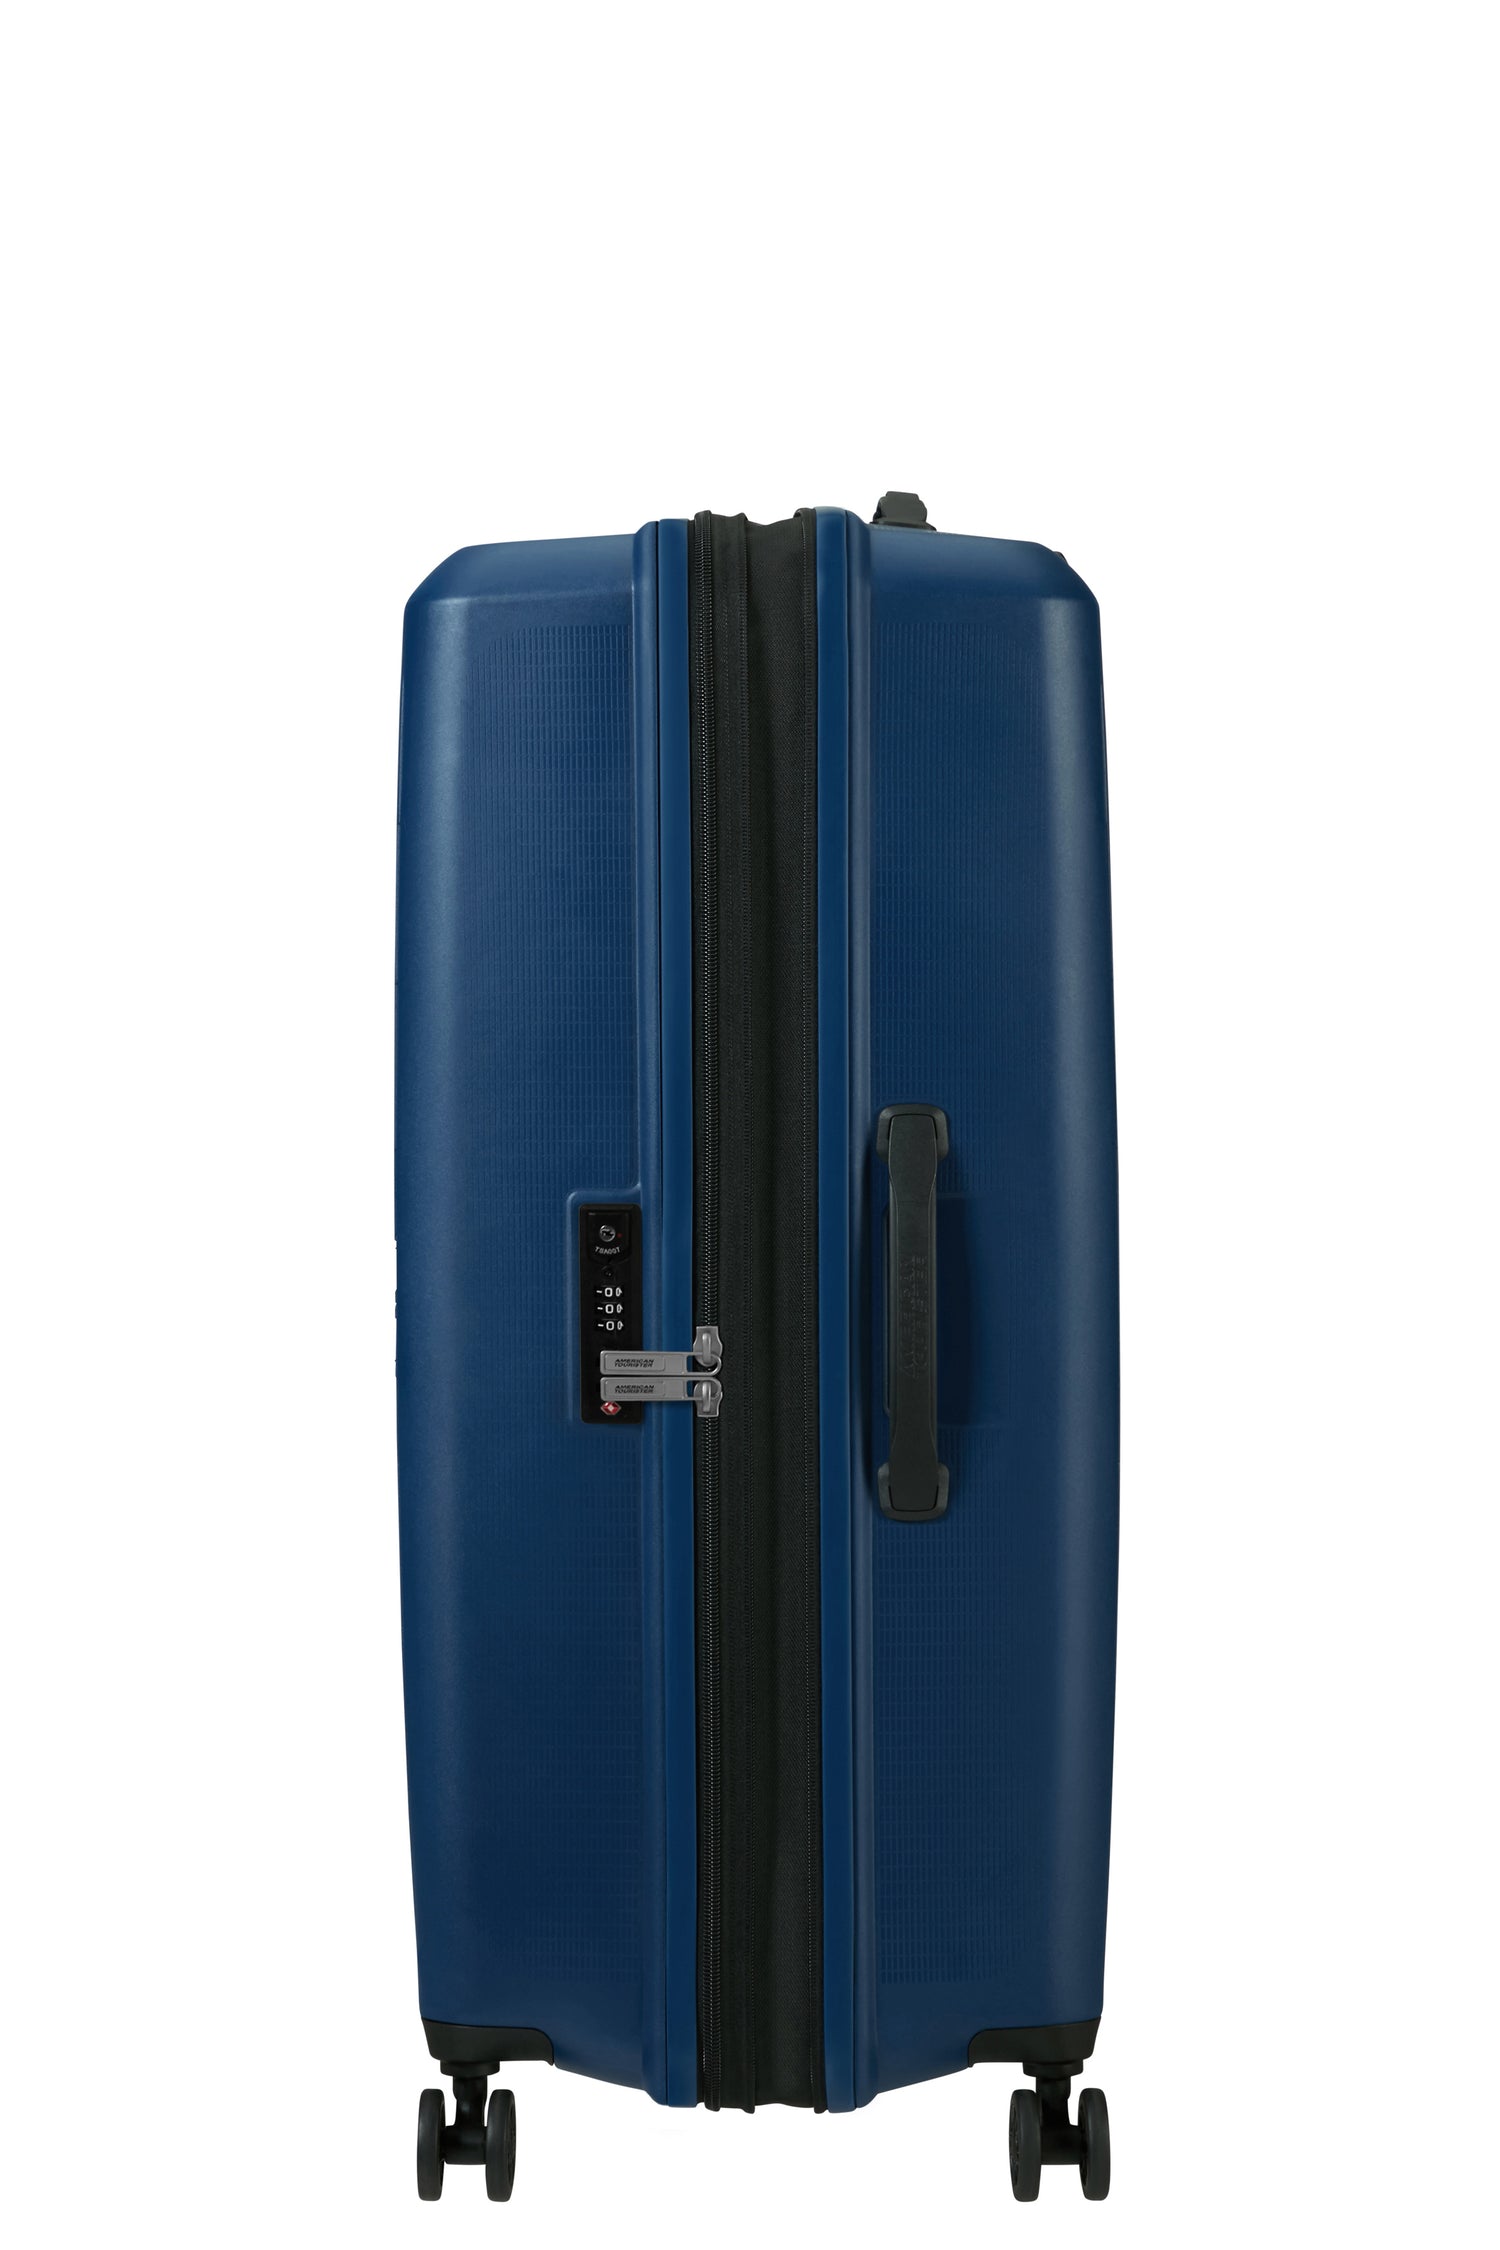 American Tourister Aerostep 77cm Expandable Spinner